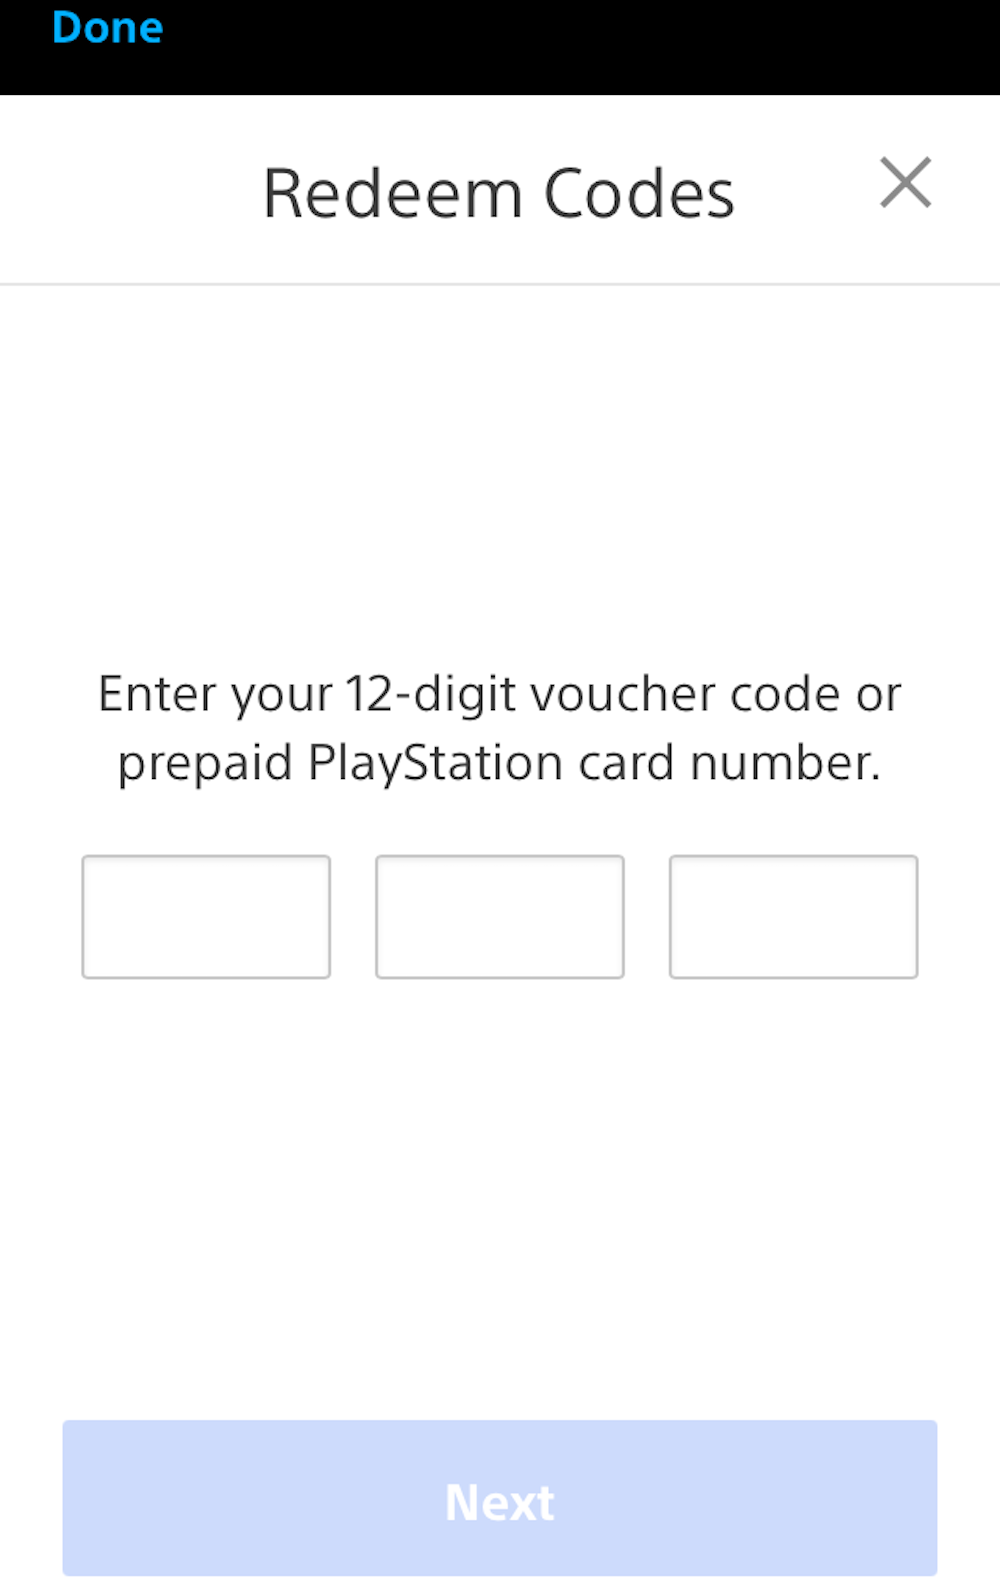 Screenshot of the code redemption screen in the PlayStation app